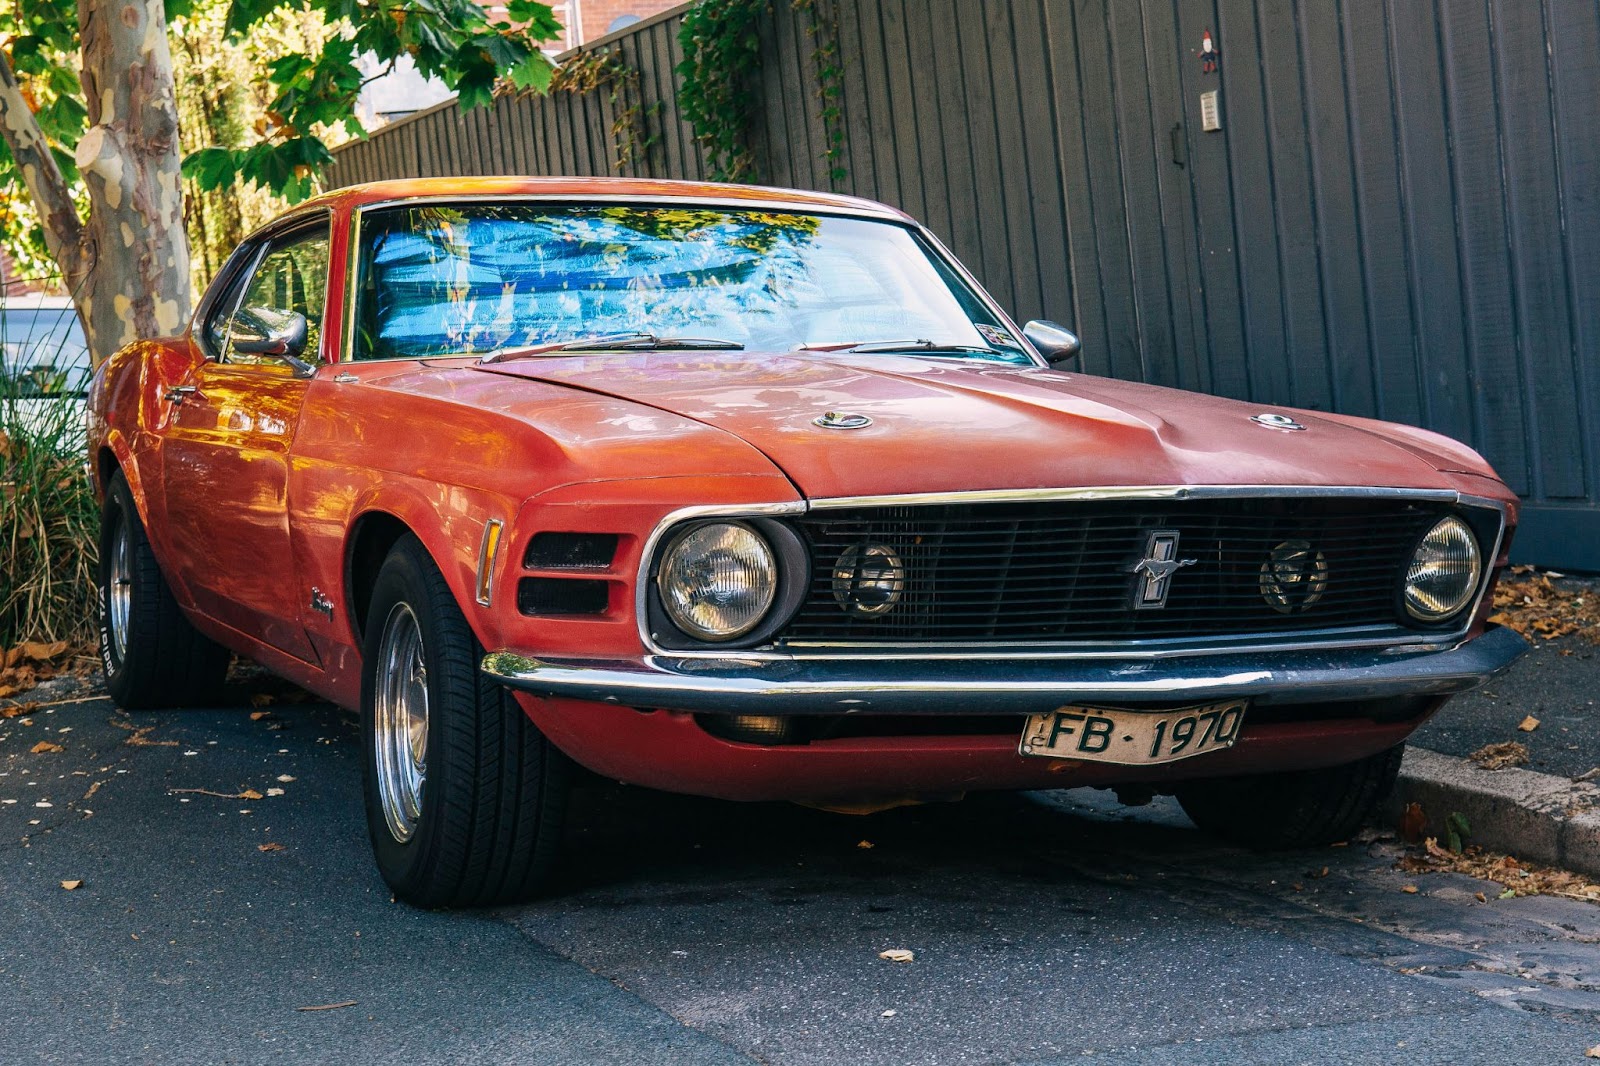 a used orange-red mustang parked alongside a driveway